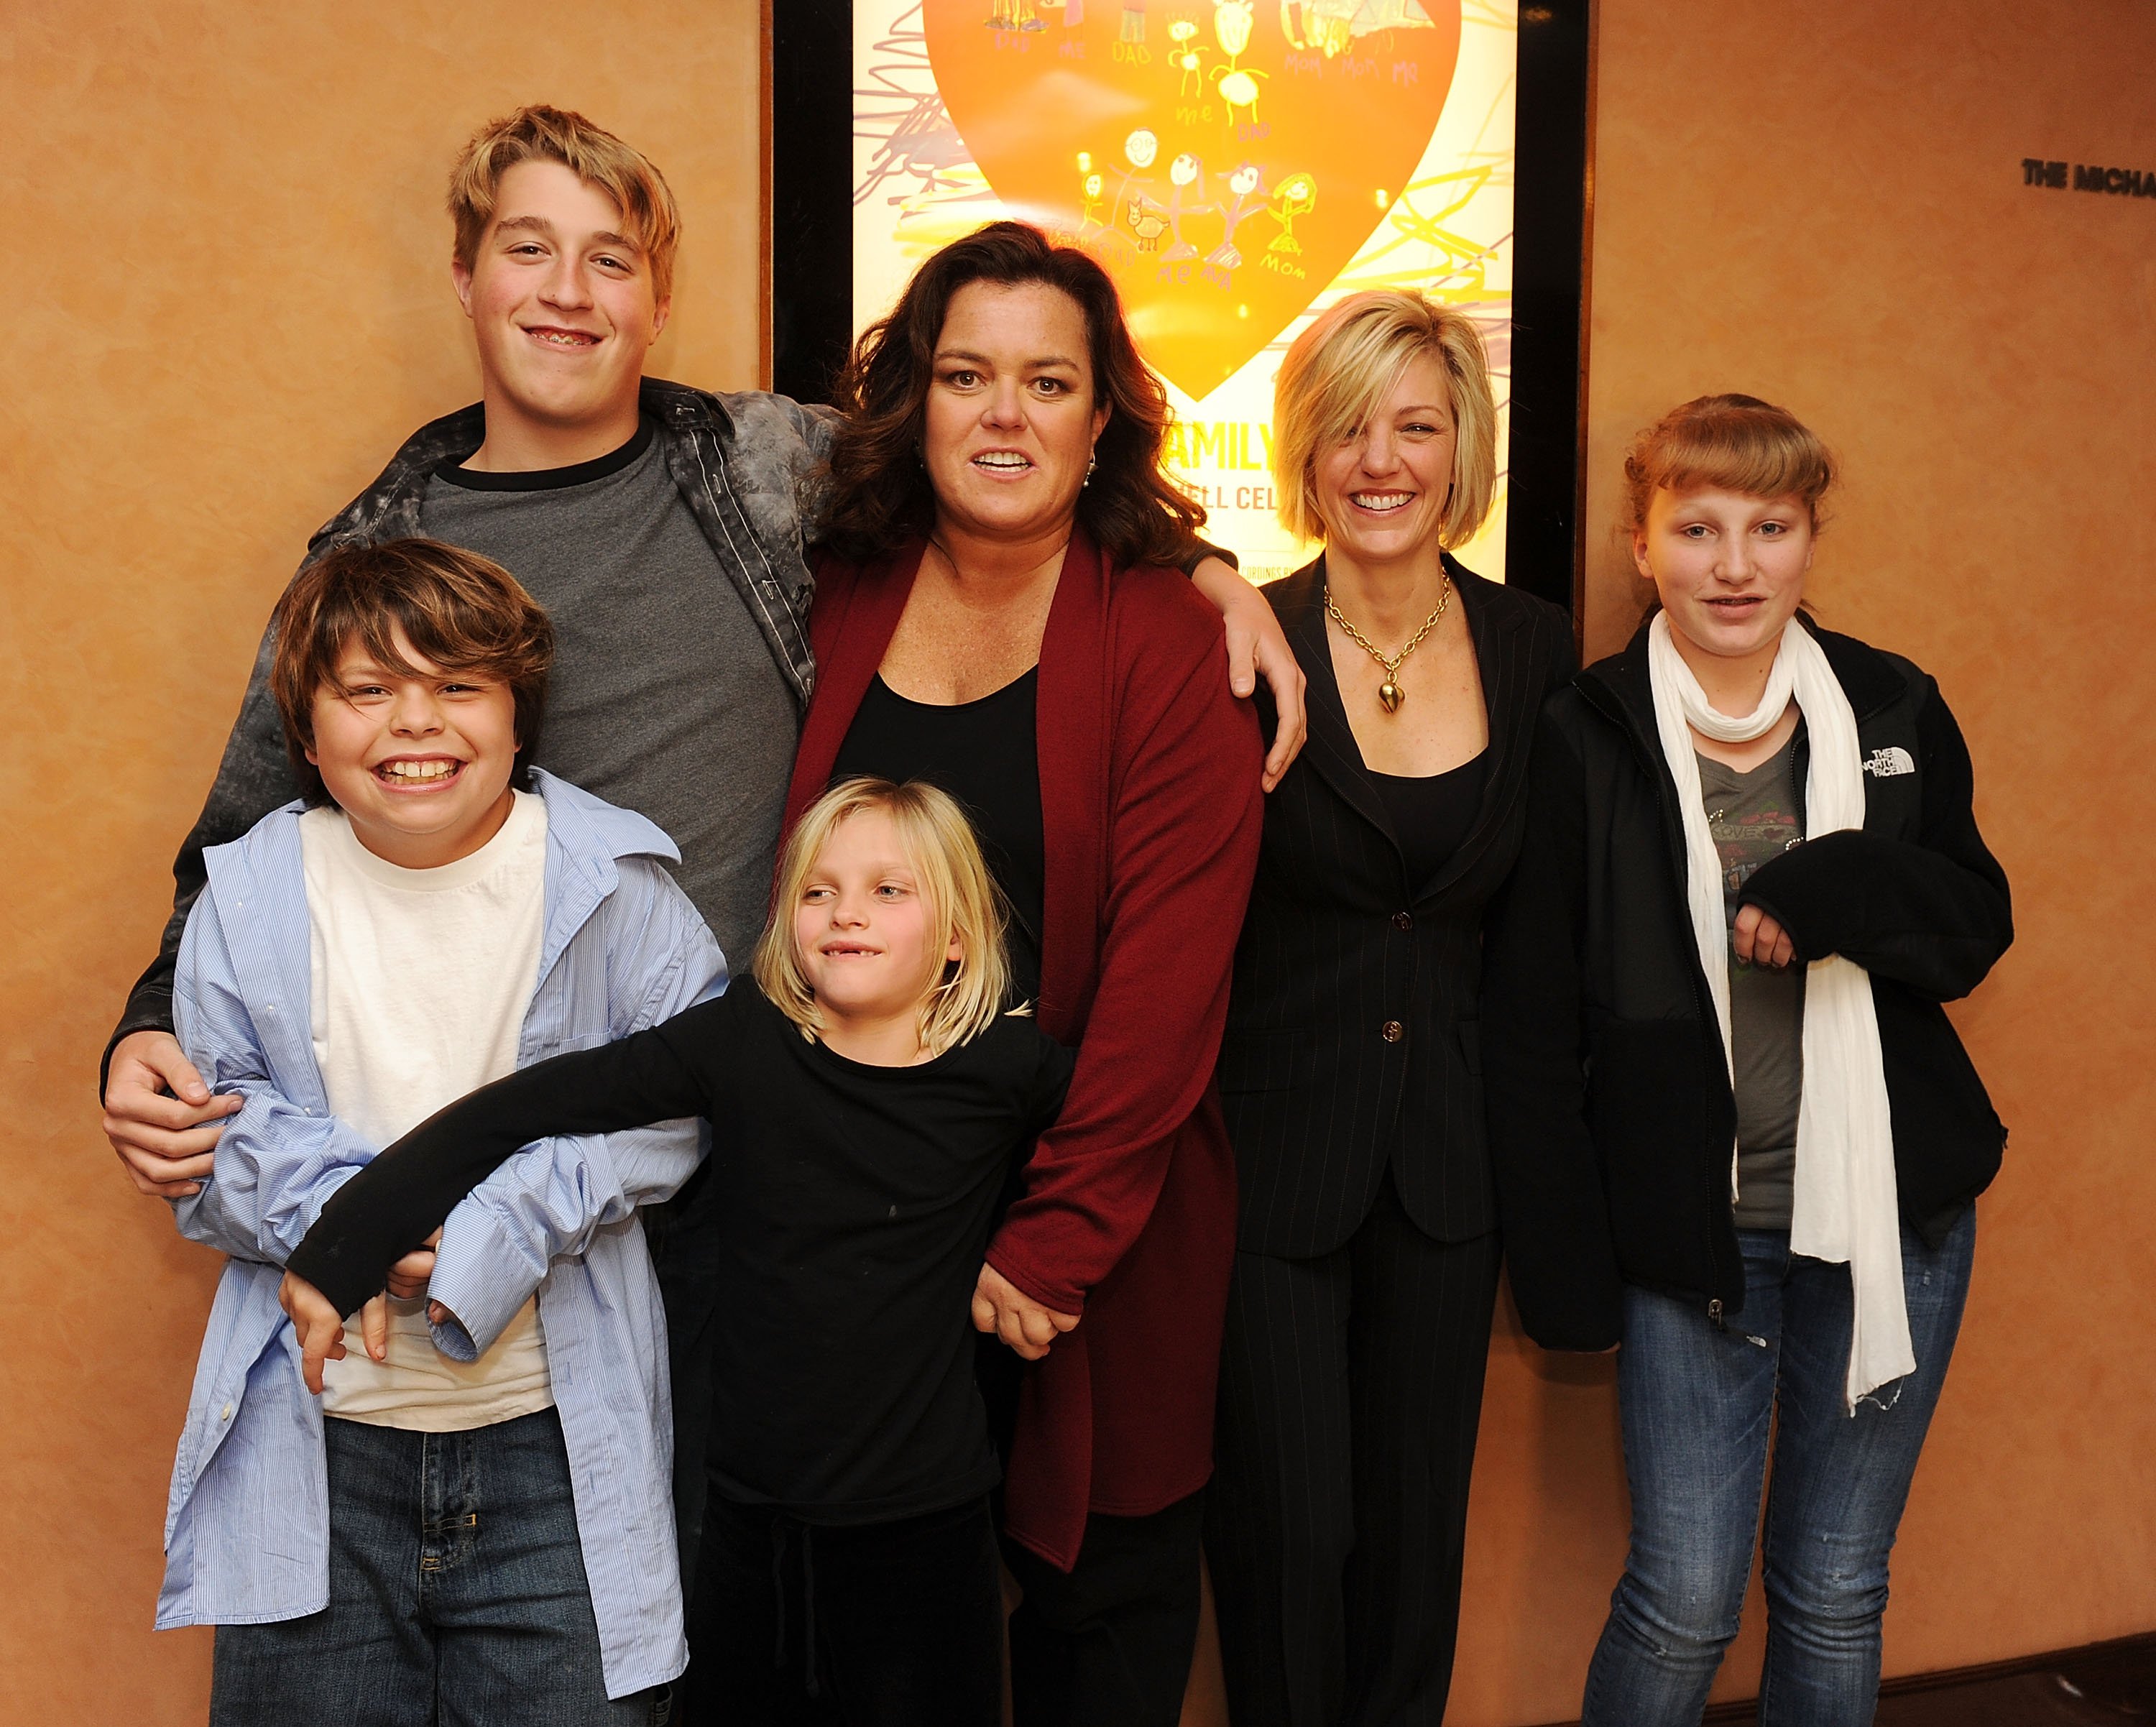 Rosie O'Donnell with her five children at the screening of "A Family is a Family" in New York City on January 19, 2010 | Photo: Getty Images